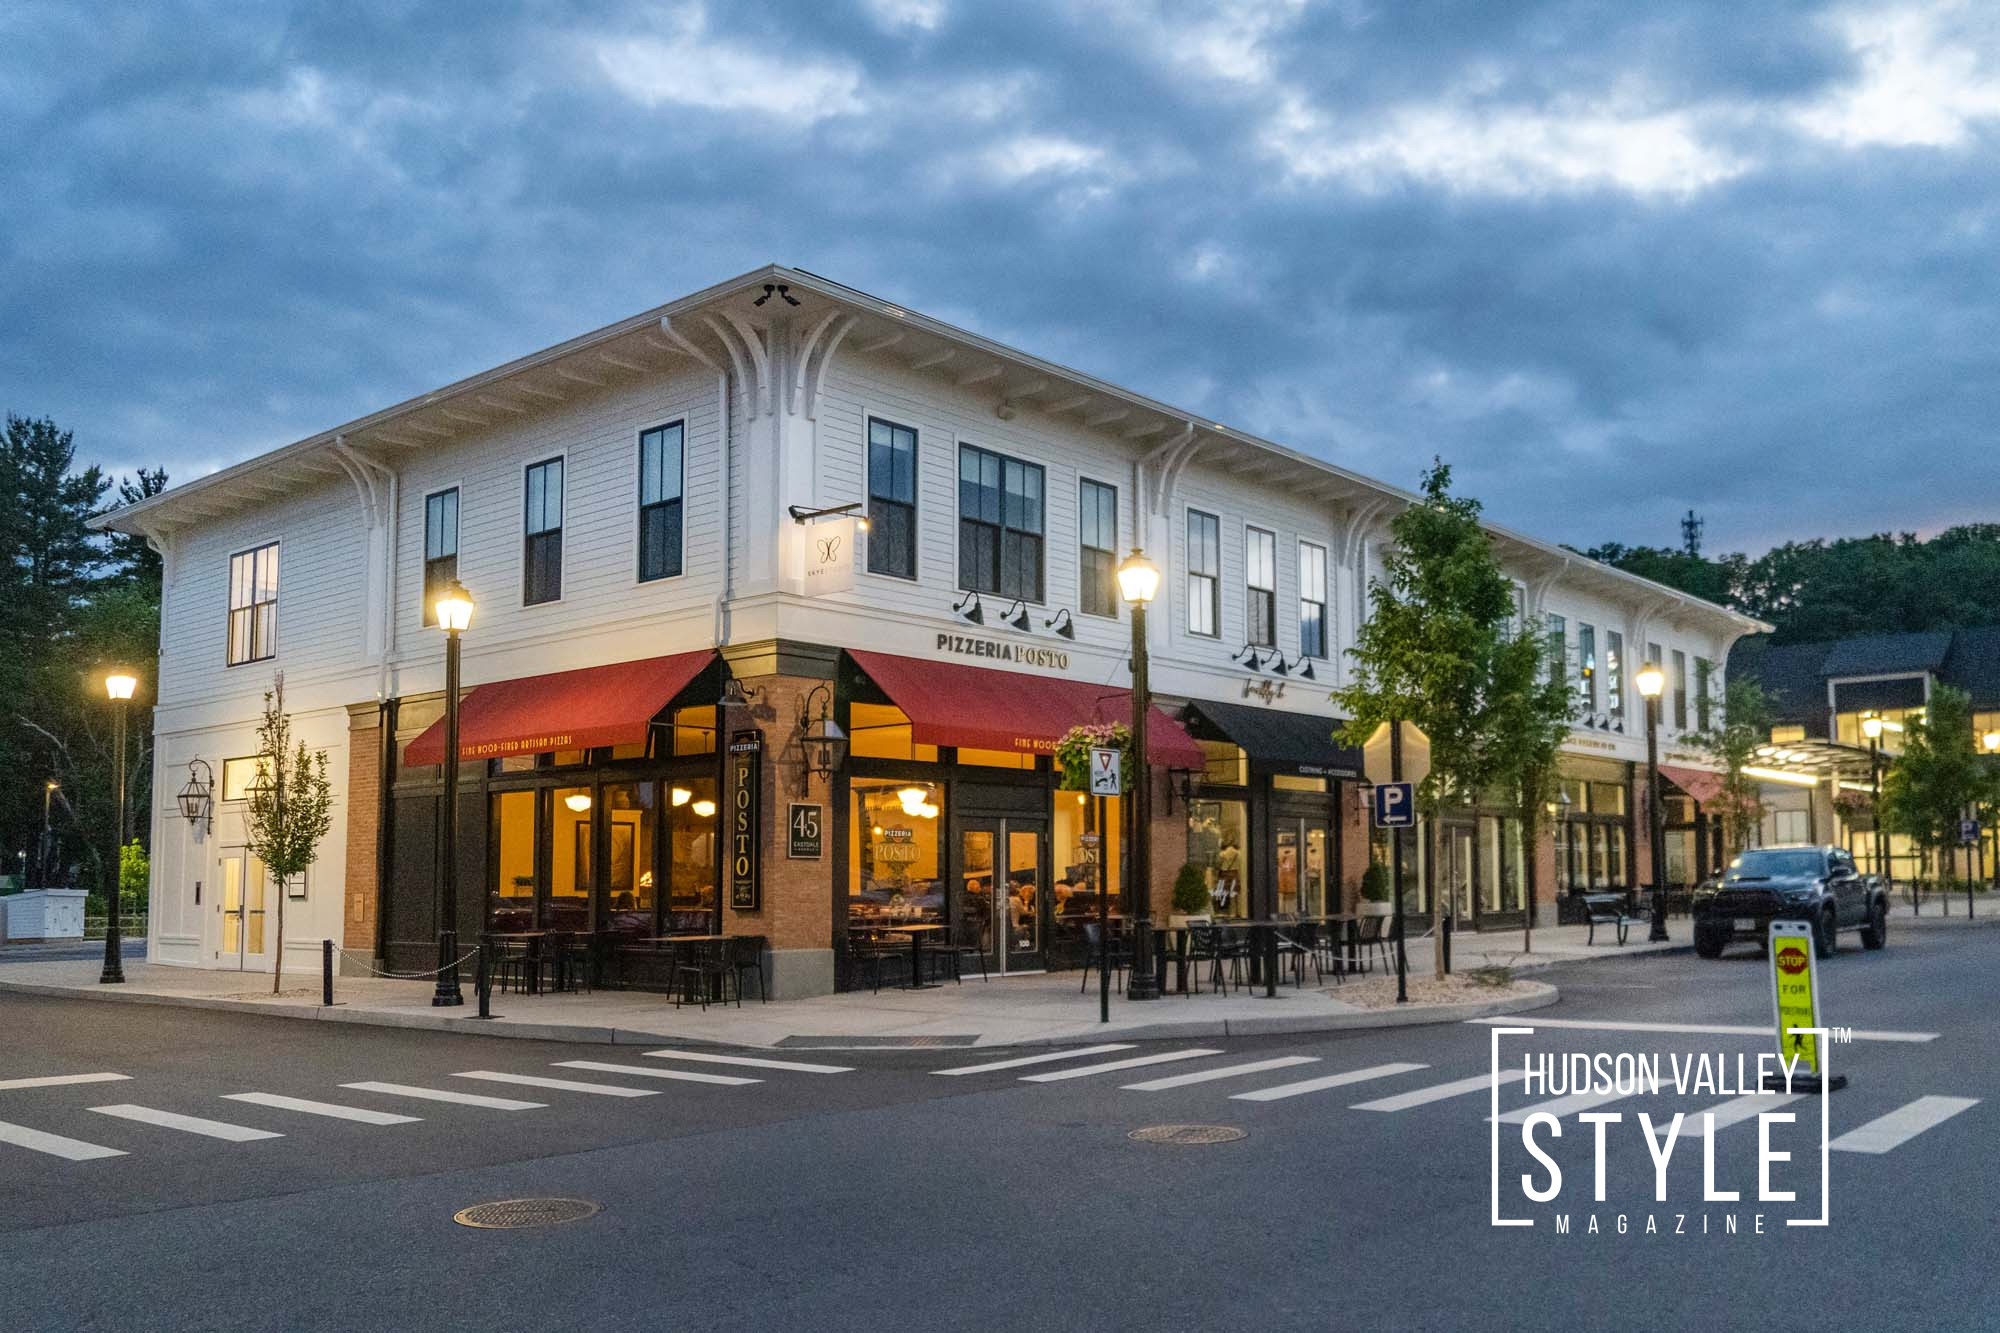 Why Dusk and Twilight Photography is Ideal for Real Estate Listings – Eastdale Village Apartments Poughkeepsie, Eastdale Village Shops, Eastdale Village Restaurants – Twilight + Dusk Photography by Alluvion Media